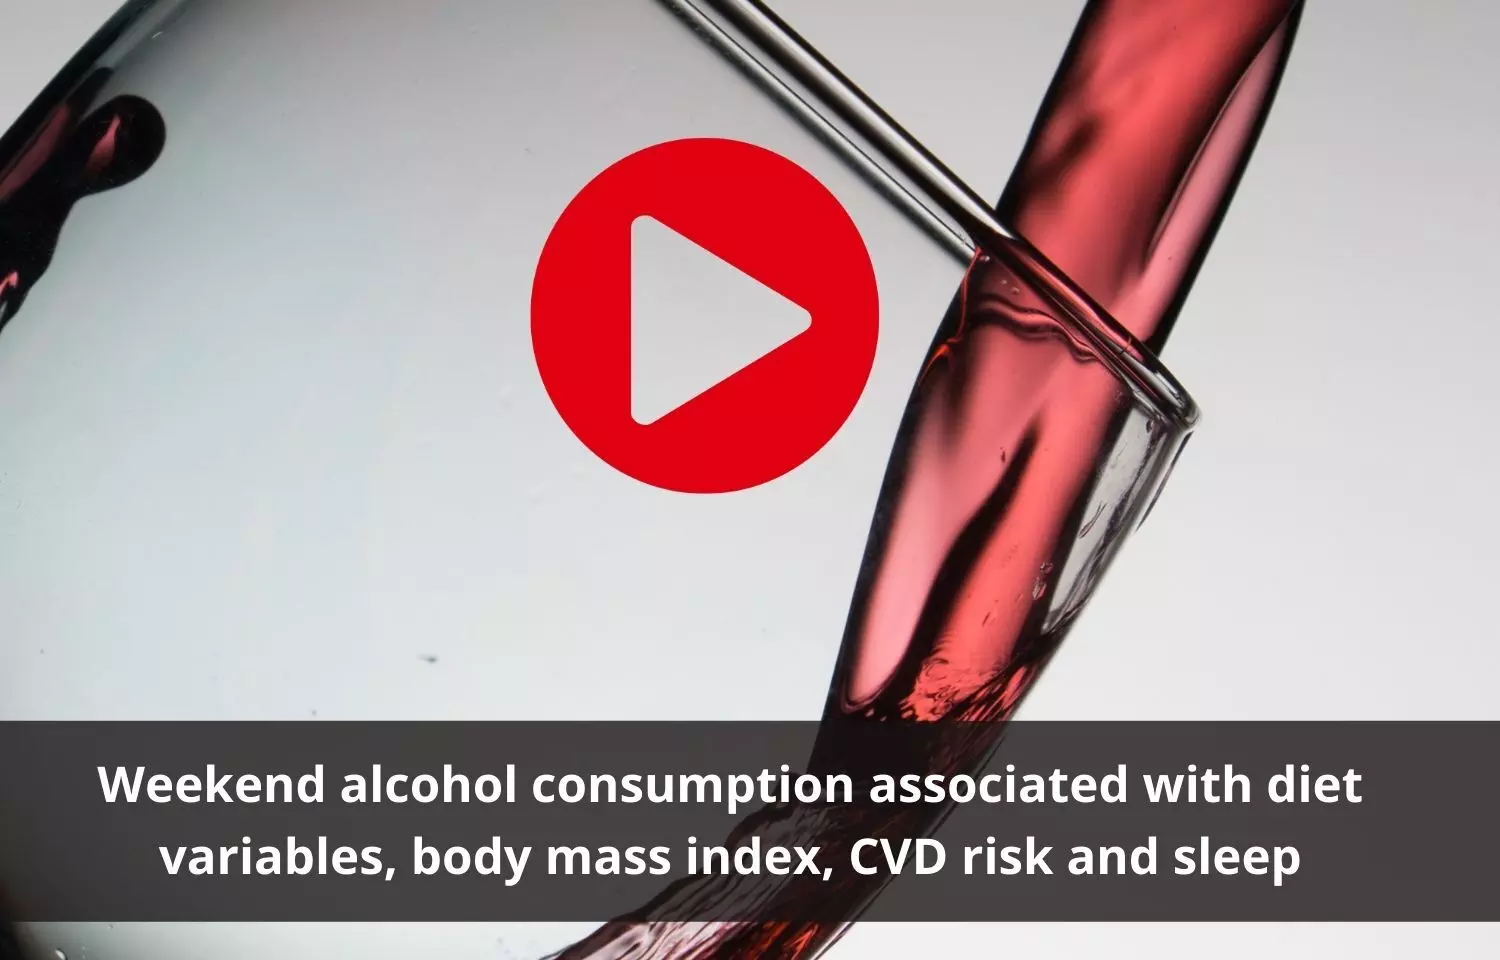 Alcohol consumption on weekends associated with CVD risk and sleep